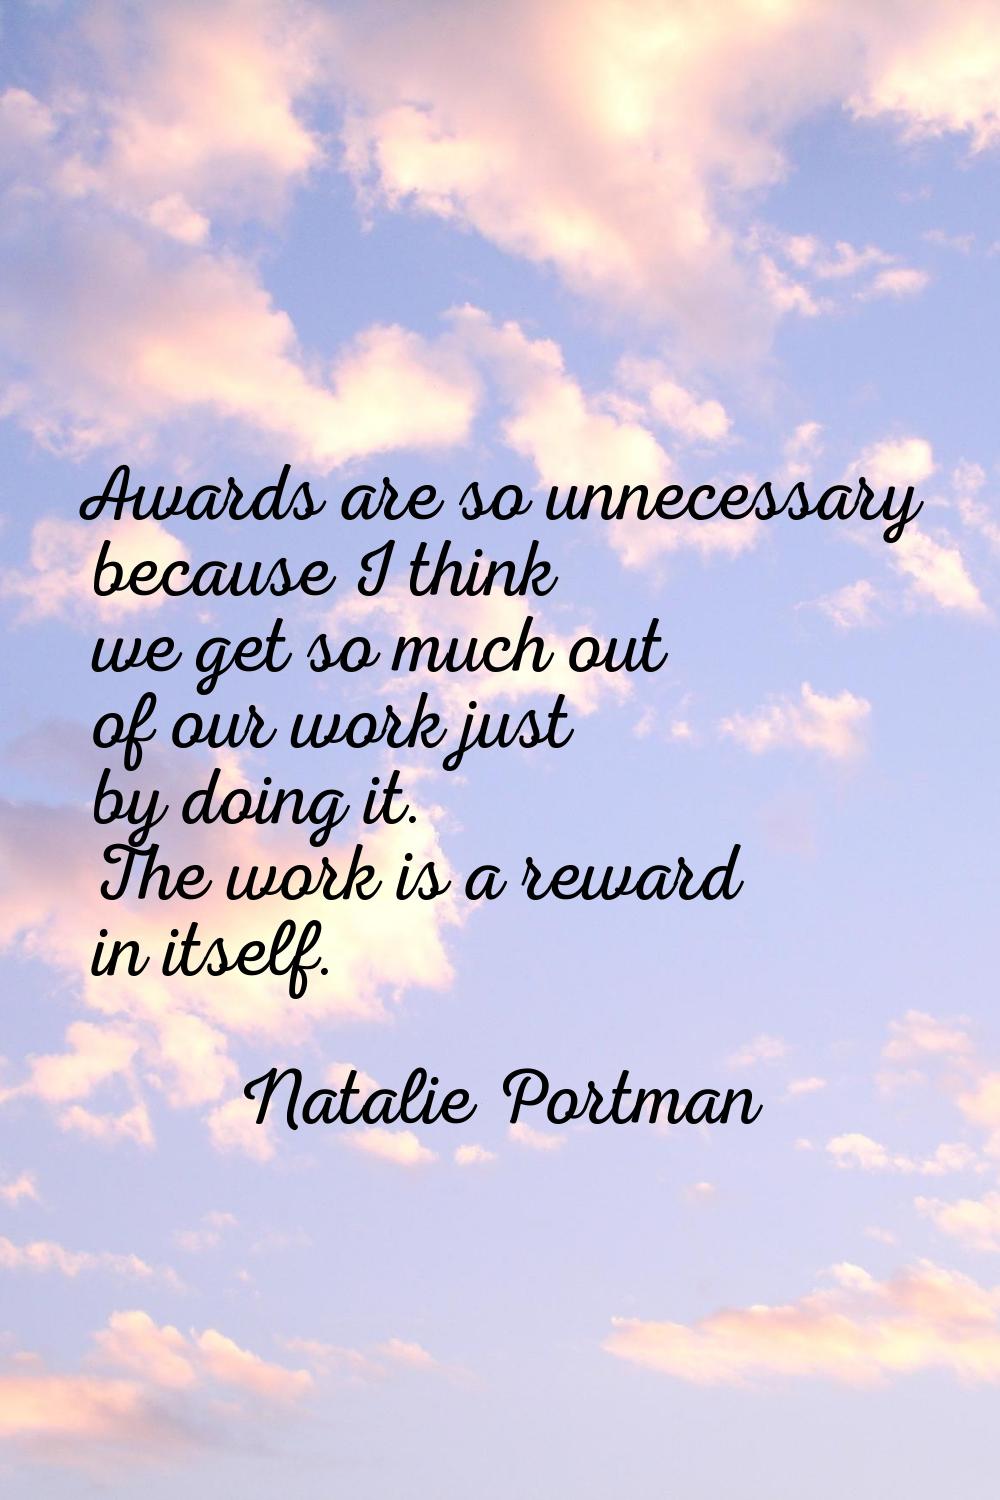 Awards are so unnecessary because I think we get so much out of our work just by doing it. The work